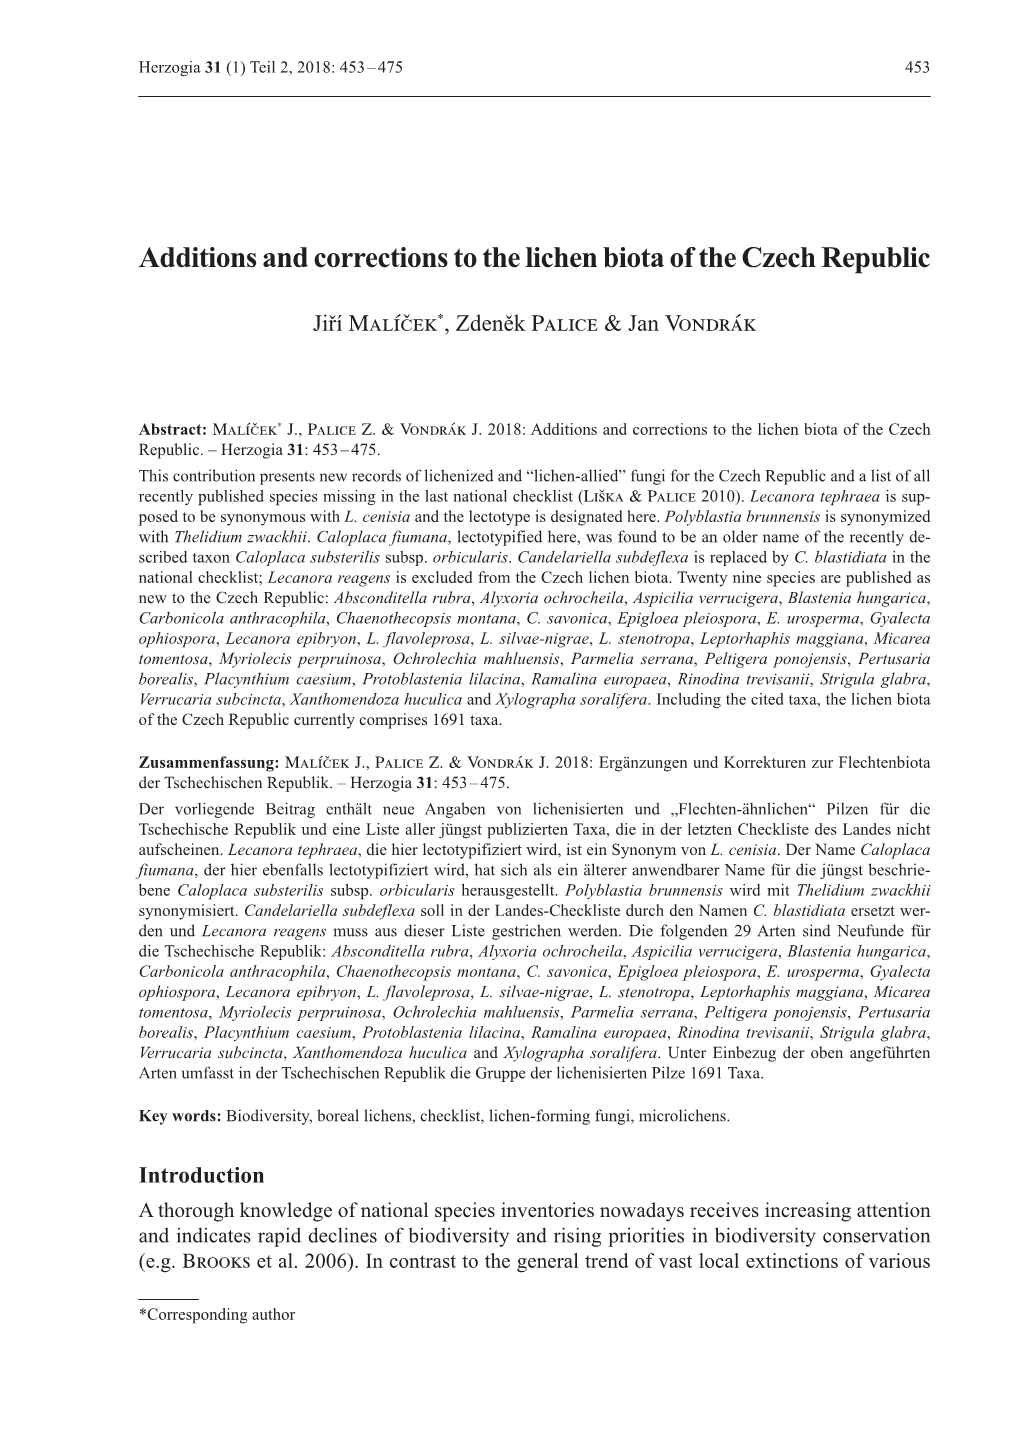 Additions and Corrections to the Lichen Biota of the Czech Republic